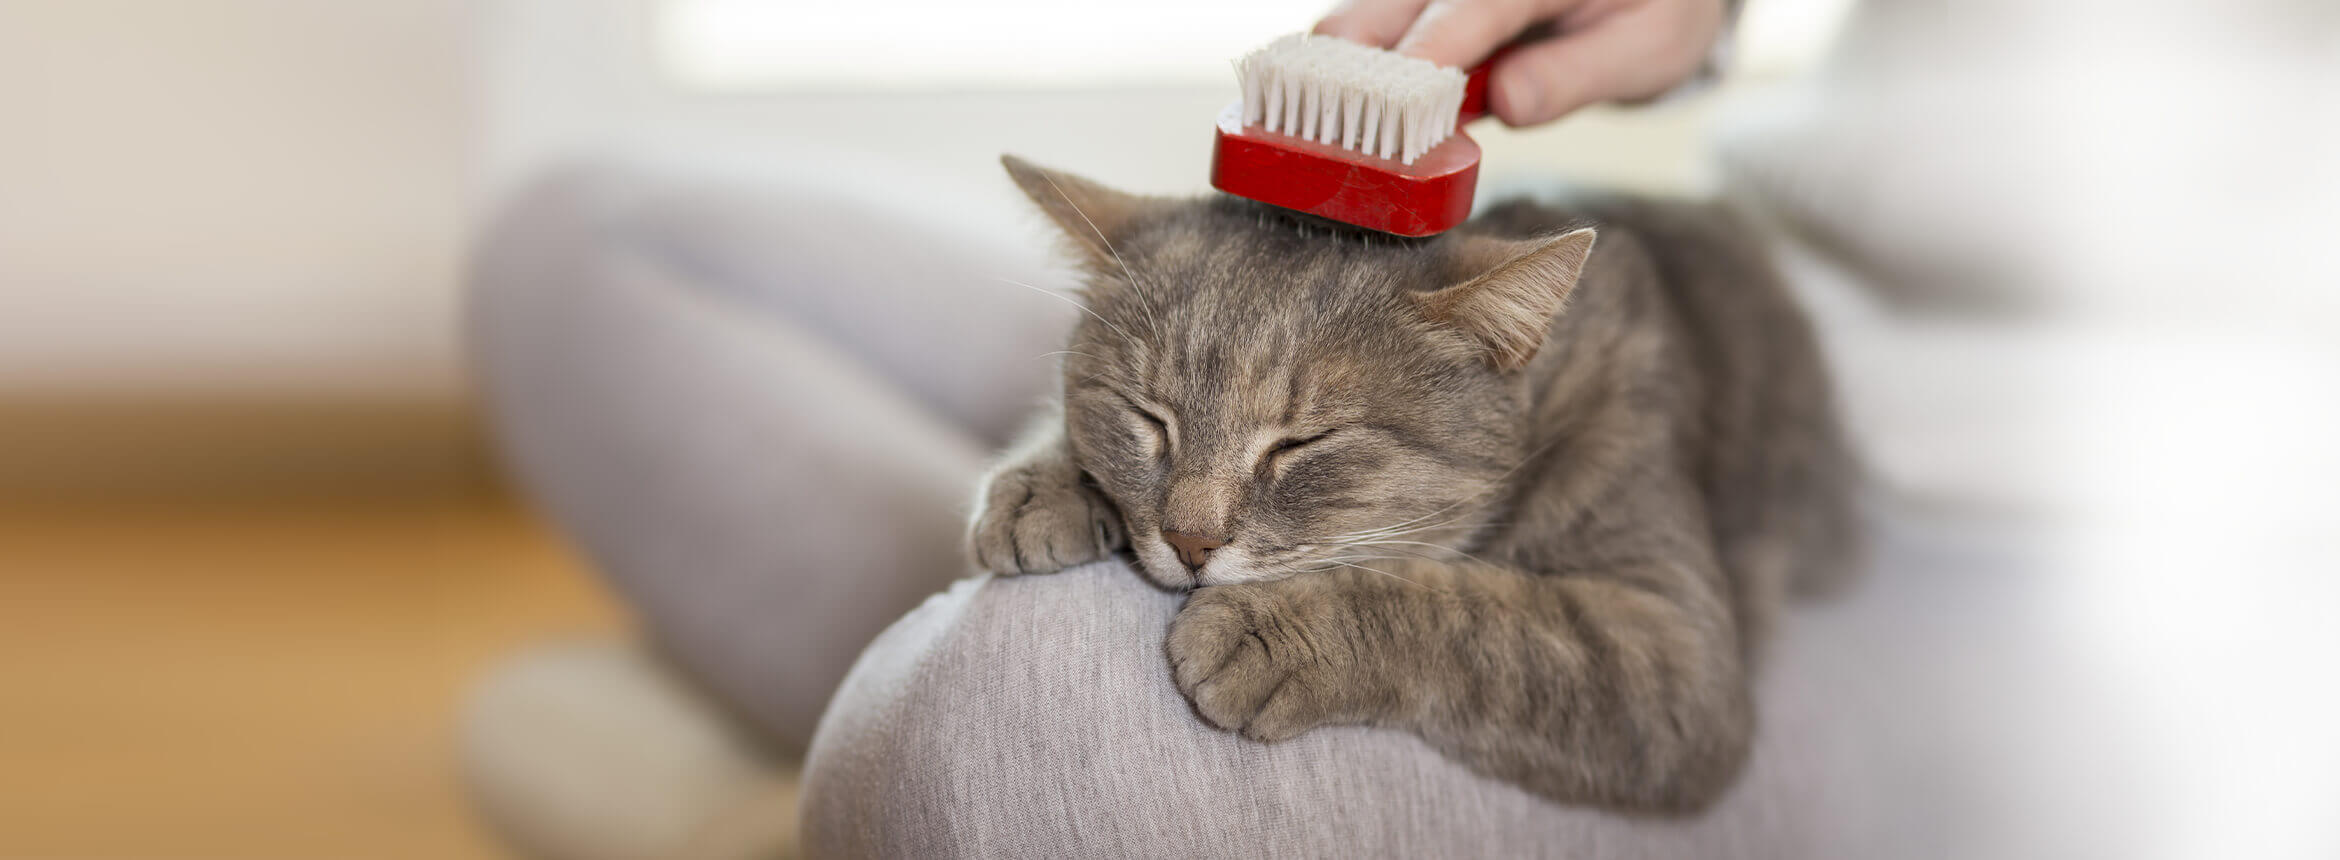 cat with closed eyes getting hair combed with brush